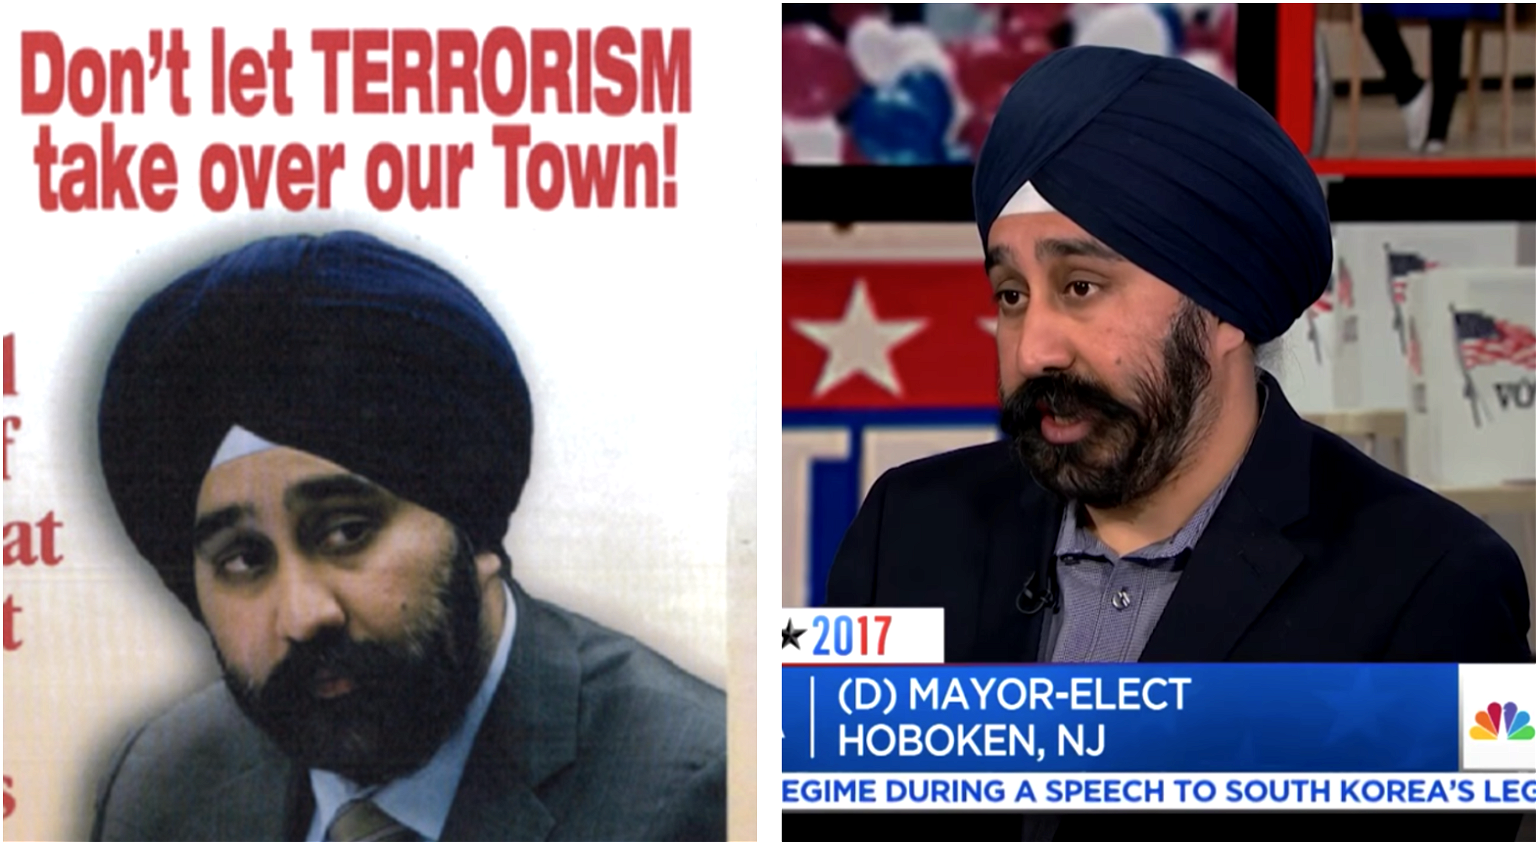 Man Labeled a ‘Terrorist’ For How He Looks Becomes First Sikh Mayor in New Jersey